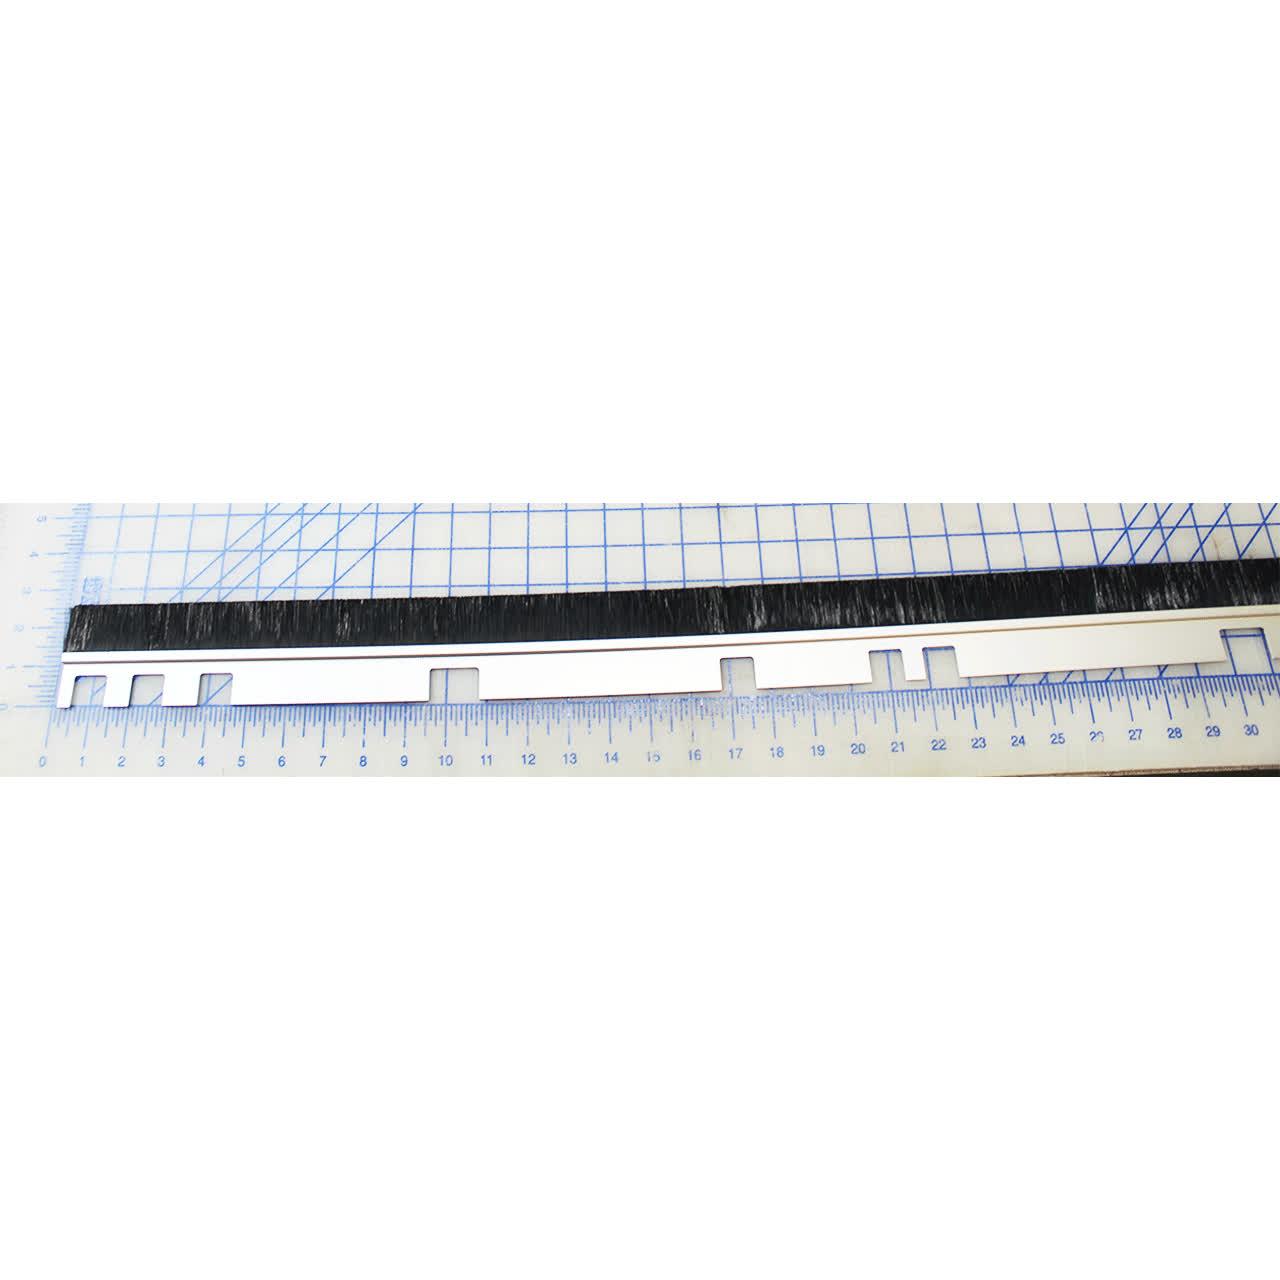 0191-0045 Brush Seal And Track, Left Or Right 6' Or 8' Levelers 1" (25.4 Mm) - Poweramp